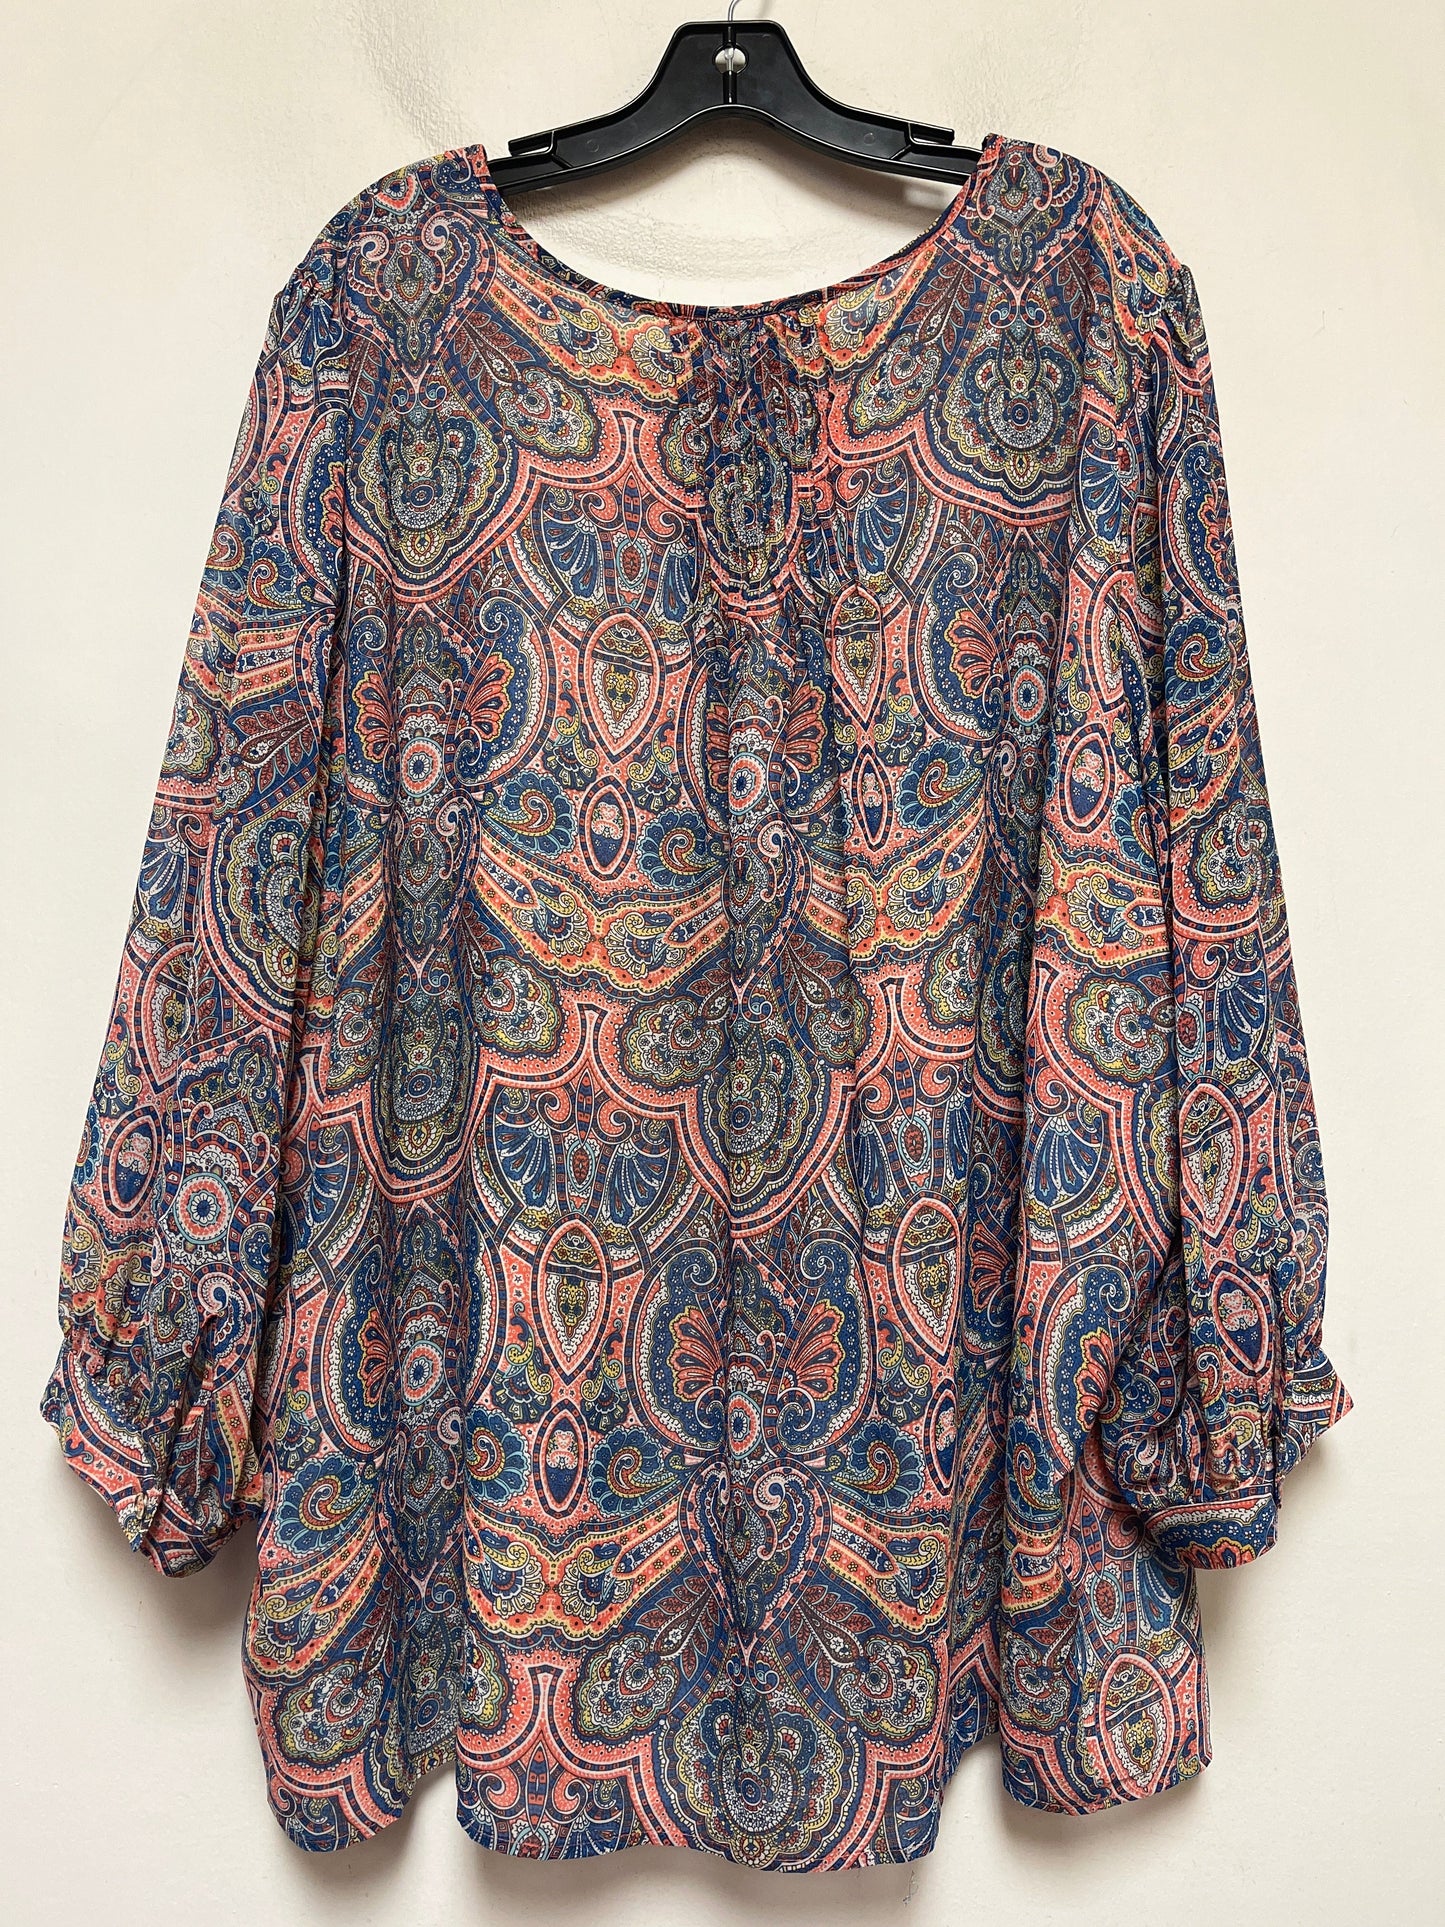 Paisley Print Top Long Sleeve Tommy Hilfiger, Size 3x